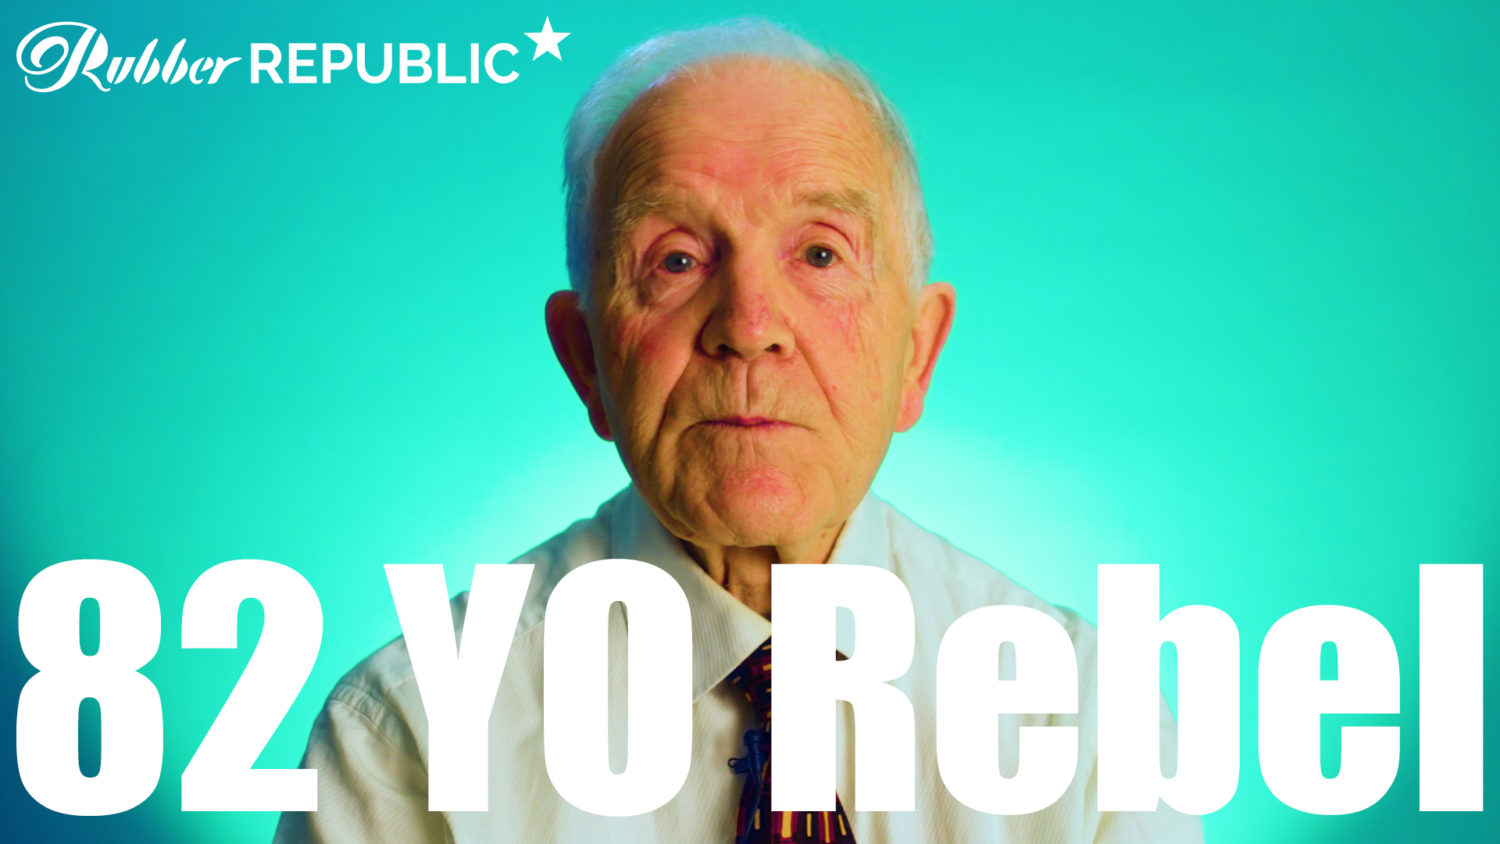 The 82 Year Old Rebel